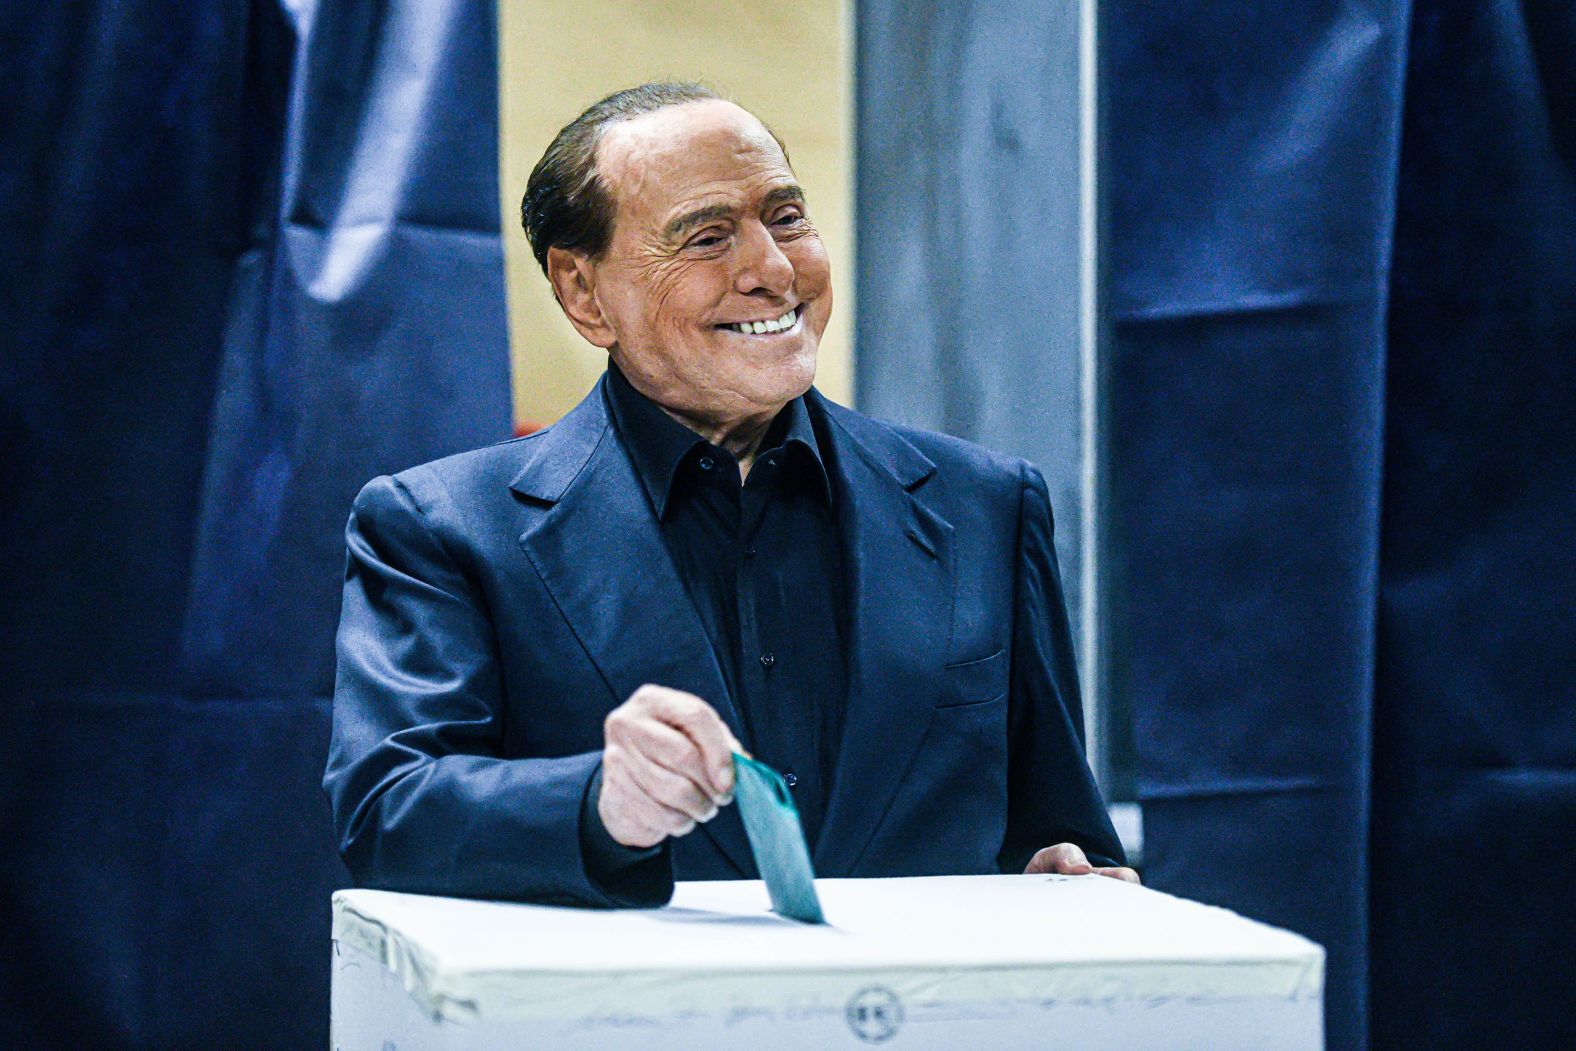 Berlusconi casts his vote during the Lombardy regional elections in Milan on February 12.